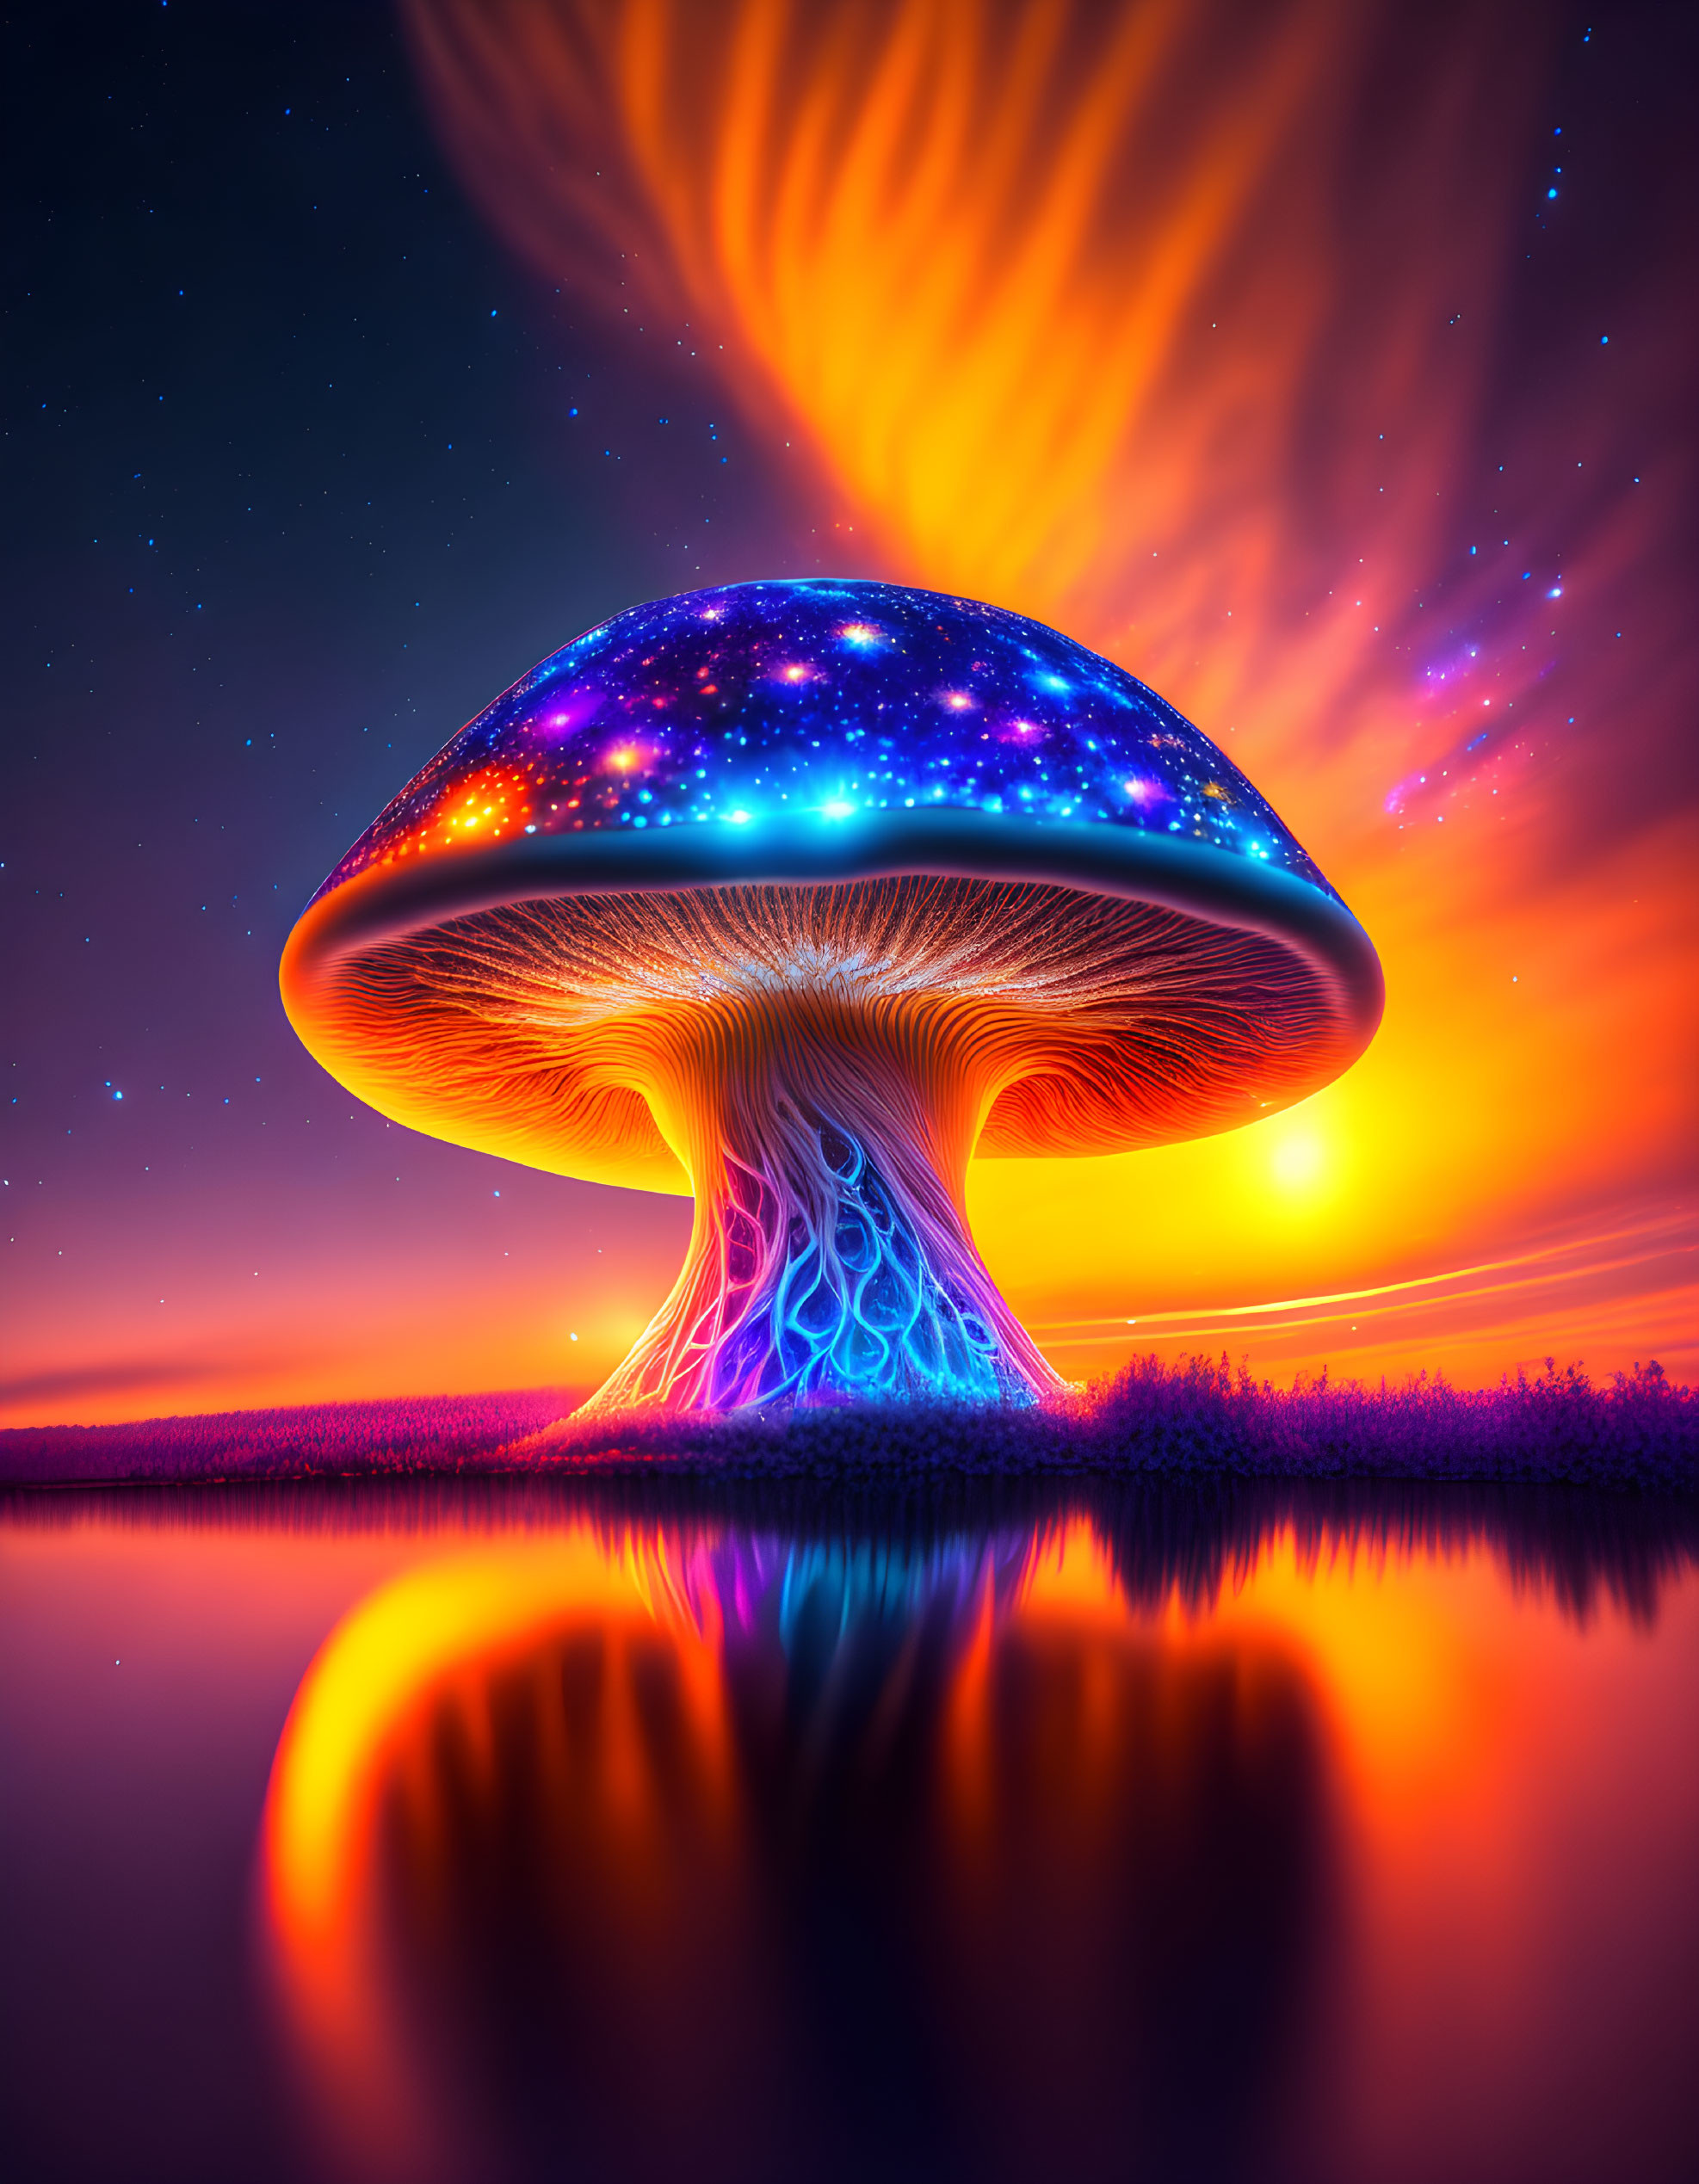 Colorful Giant Mushroom Artwork with Star-Filled Cap Reflecting in Water at Sunset